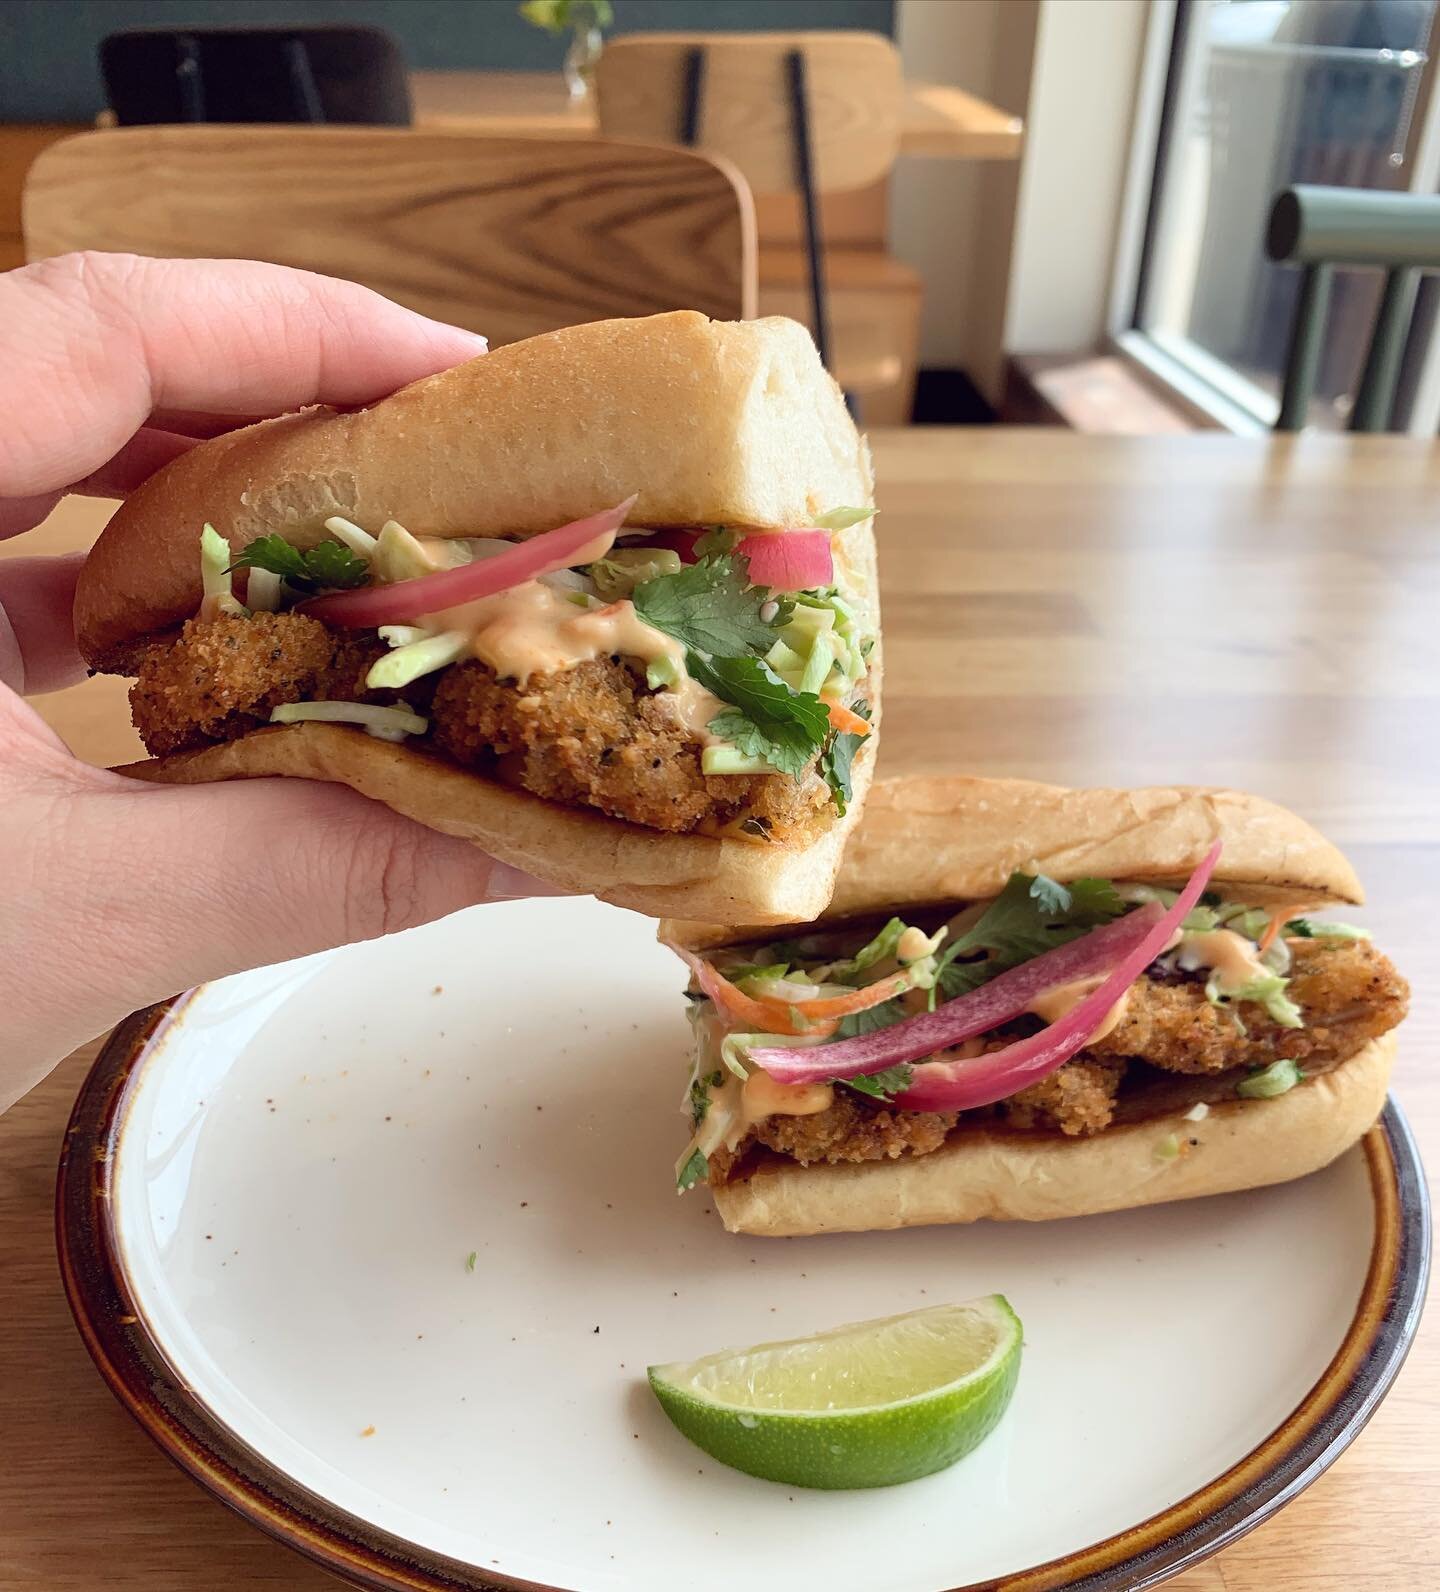 So many of you have asked for it that we&rsquo;ve brought the Fun Guy Sandwich back on special this week 👏🏽 These local oyster mushrooms are hand breaded in small batches, fried and topped with sesame slaw, sriracha mayo, pickled onions and cilantr